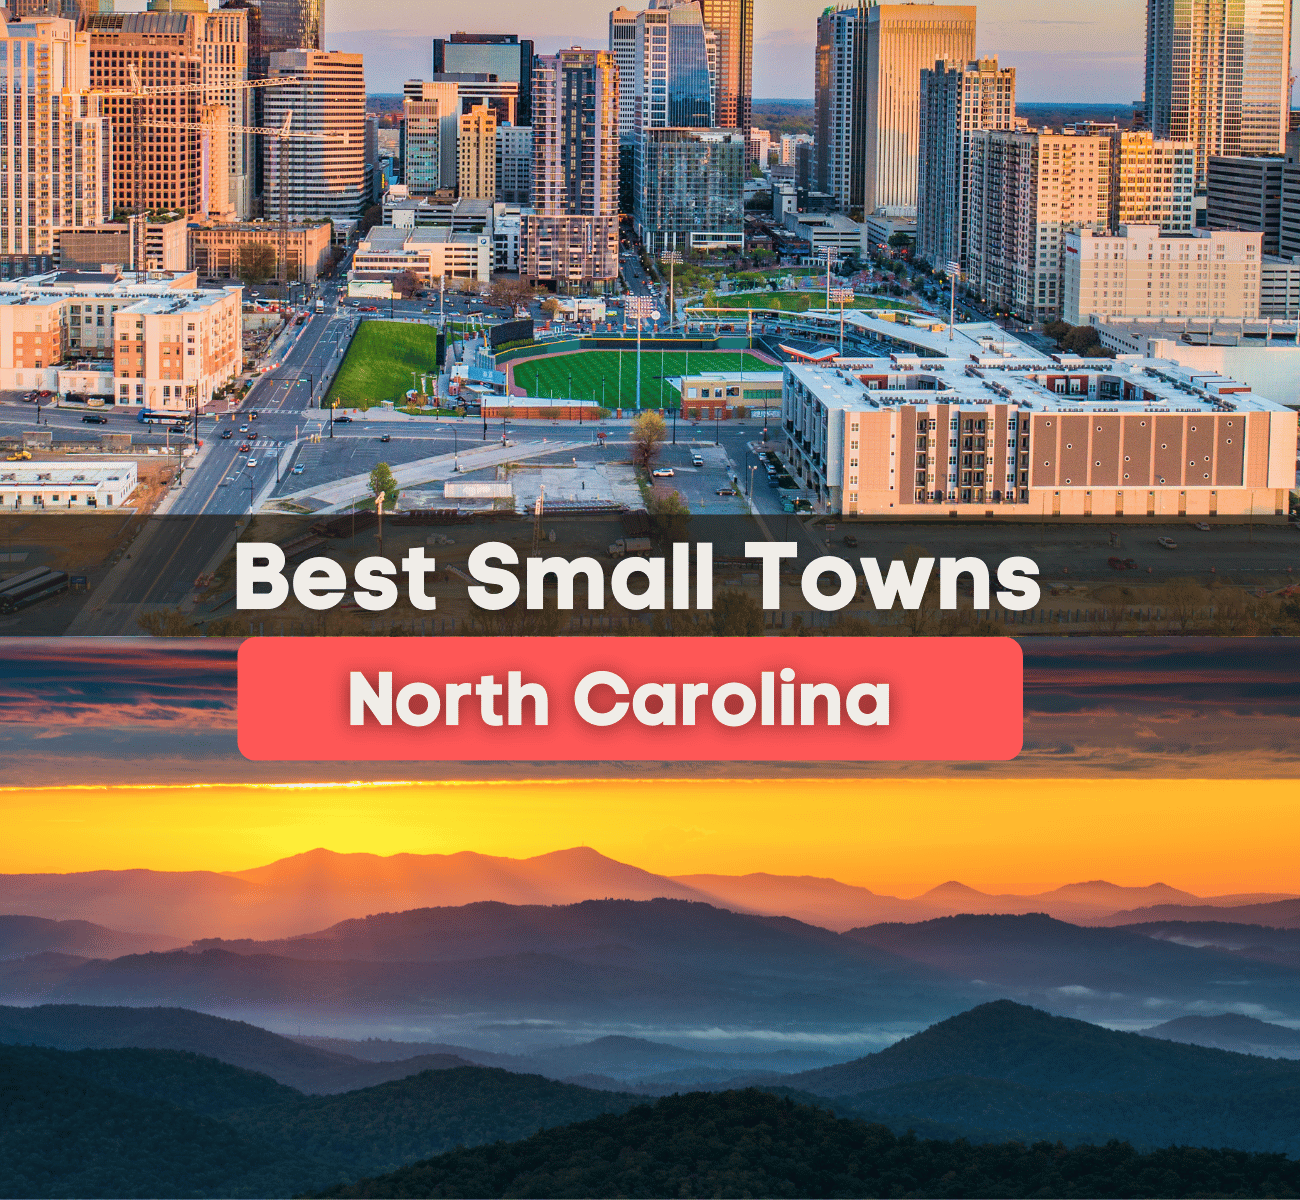 11 Best Small Towns in North Carolina